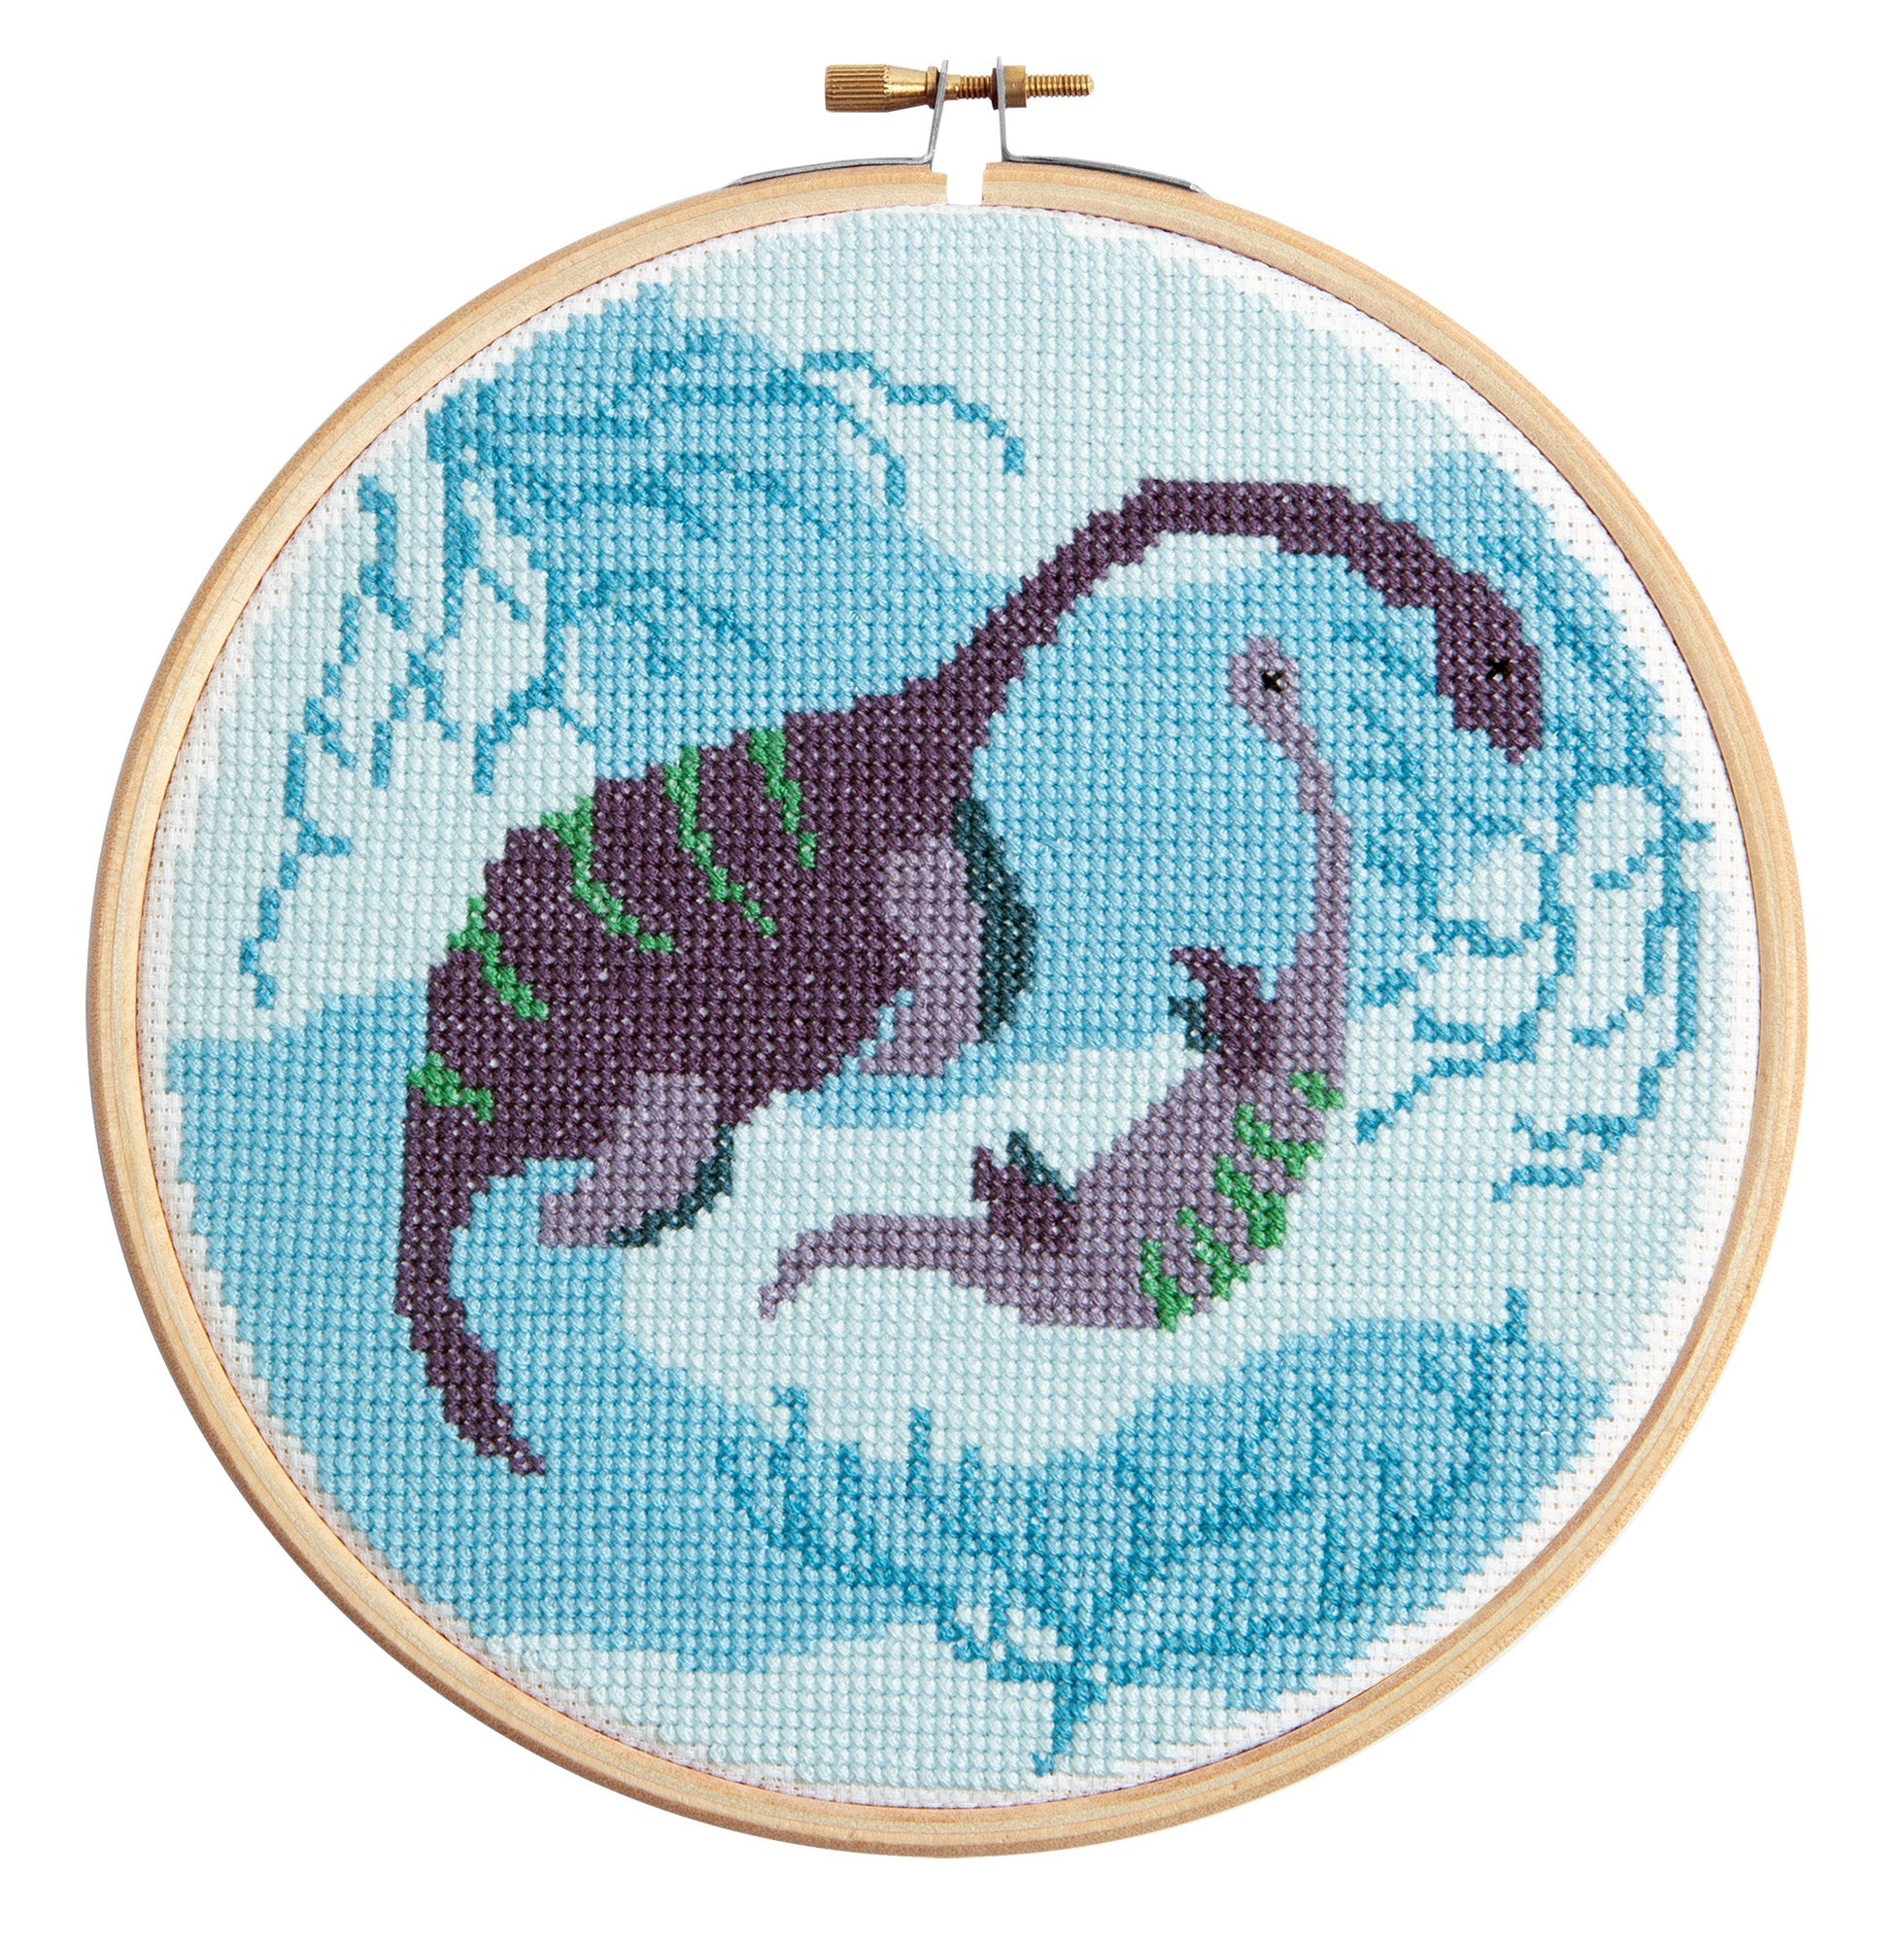 Cross Stitch Accessories, Needlework Accessories, Embroidery Whale